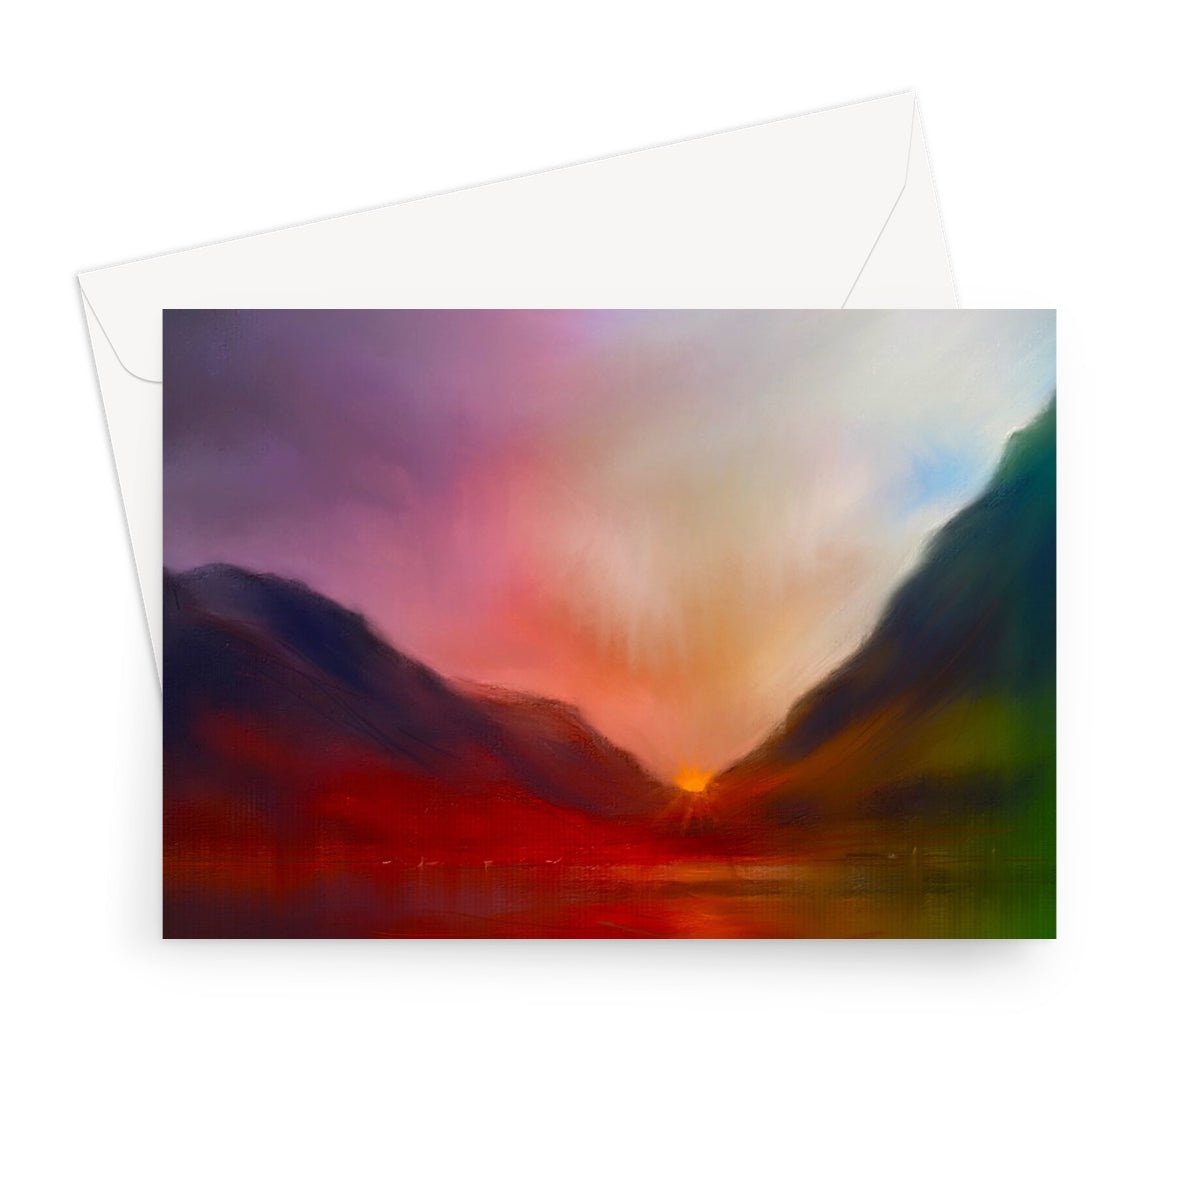 Glencoe Sunset Art Gifts Greeting Card-Greetings Cards-Glencoe Art Gallery-7"x5"-1 Card-Paintings, Prints, Homeware, Art Gifts From Scotland By Scottish Artist Kevin Hunter